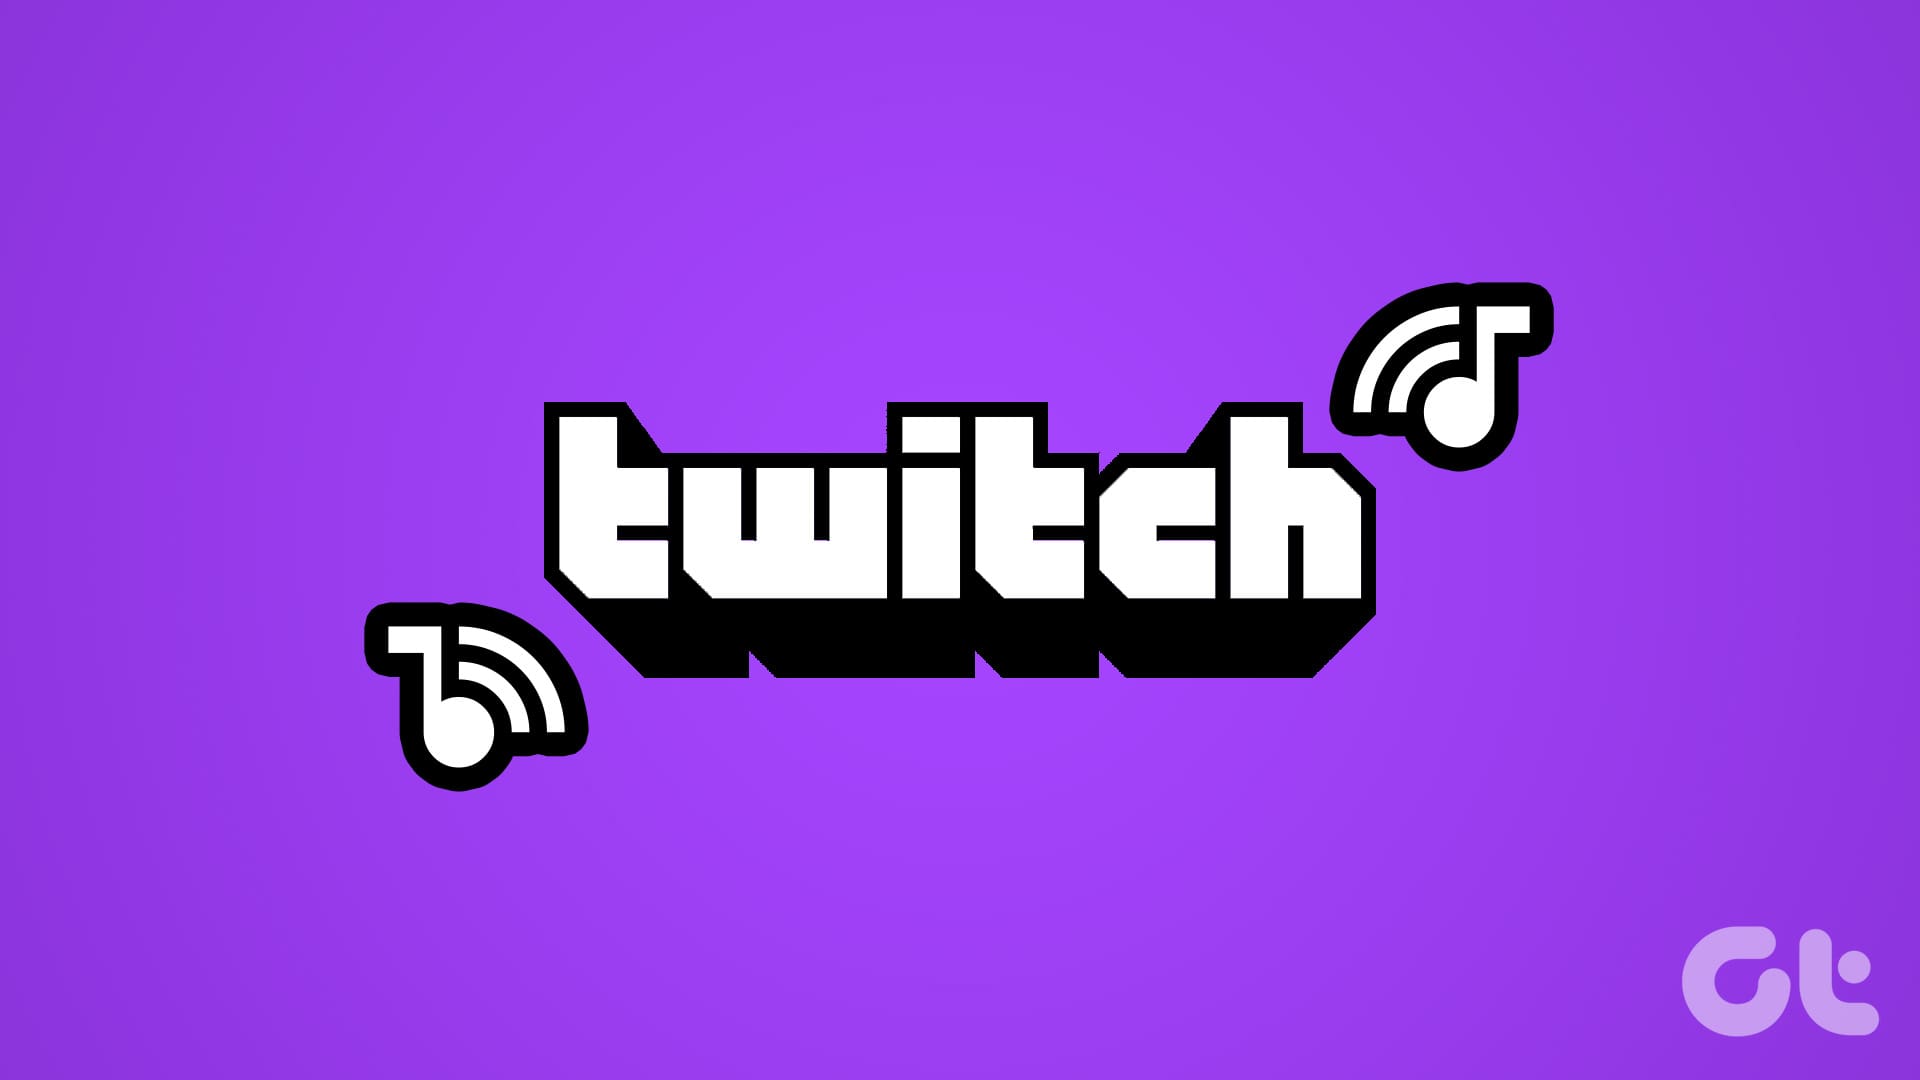 How to Play Music on Twitch Without Infringing Copyright